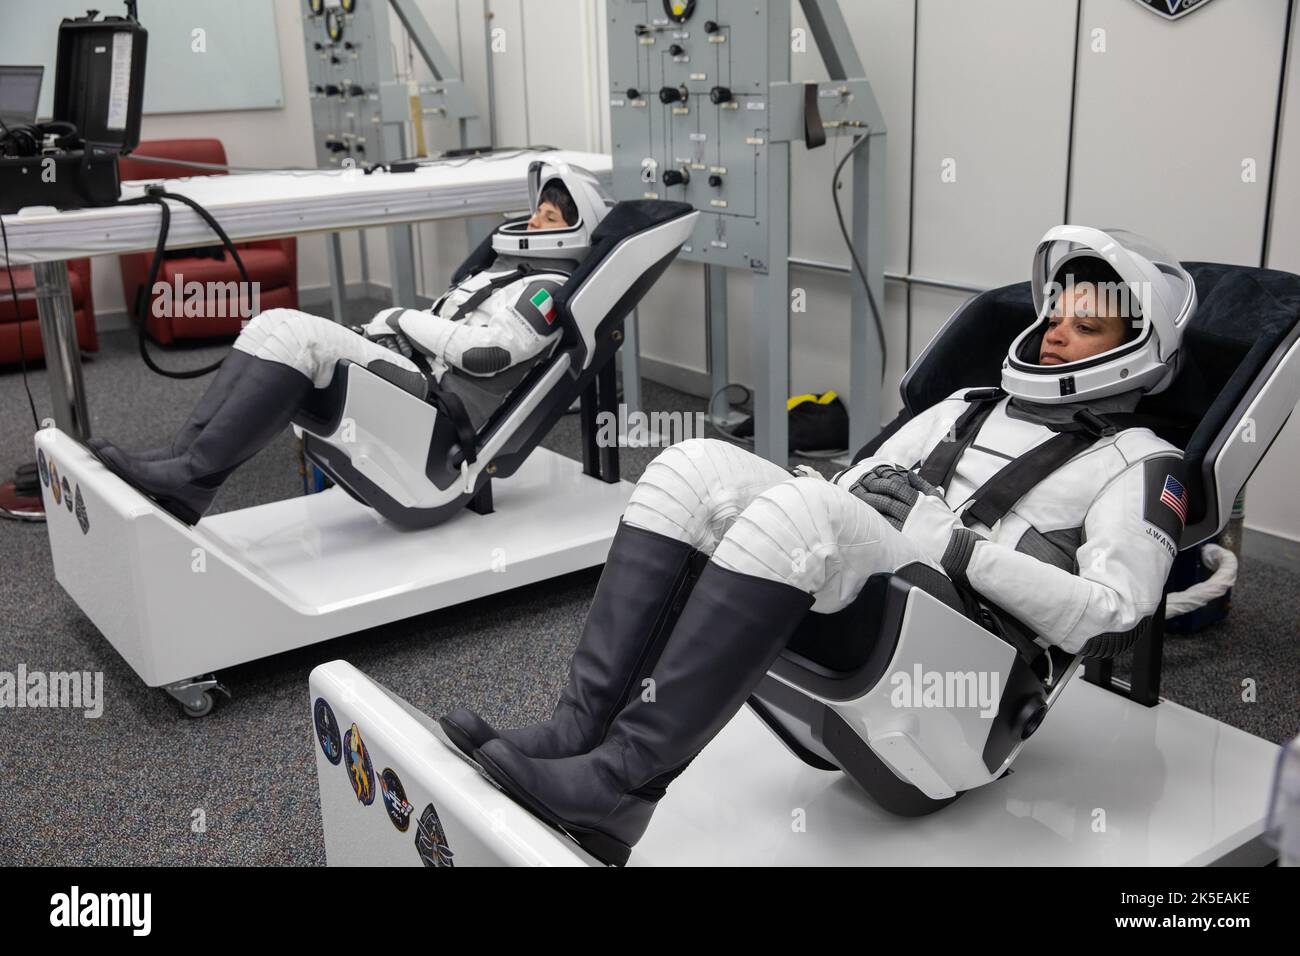 Crew-4 mission astronauts Samantha Cristoforetti, left, and Jessica Watkins relax in the suit room in the Astronaut Crew Quarters inside Kennedy Space Center’s Neil A. Armstrong Operations and Checkout Building on April 27, 2022. A team of SpaceX suit technicians assisted the crew as they put on their custom-fitted spacesuits and checked the suits for leaks. Astronauts Kjell Lindgren and Bob Hines will join Cristoforetti and Watkins aboard SpaceX’s Crew Dragon, powered by the company’s Falcon 9 rocket, which will carry the four-person crew to the International Space Station as part of NASA’s C Stock Photo